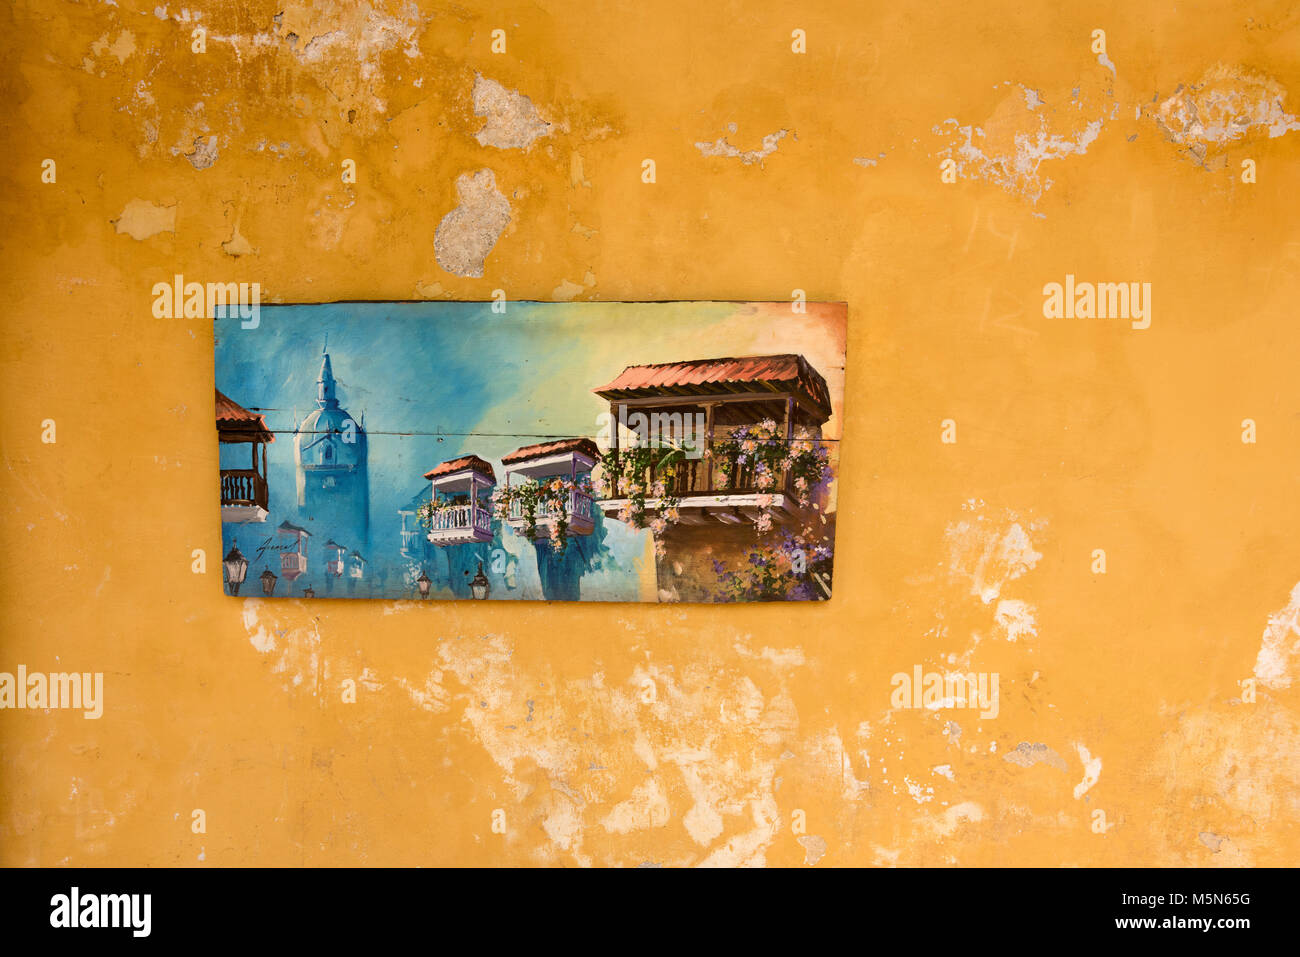 A picture of a street scene in Cartagena Coombia hanging on a distressd looking wall with flaking paint Stock Photo